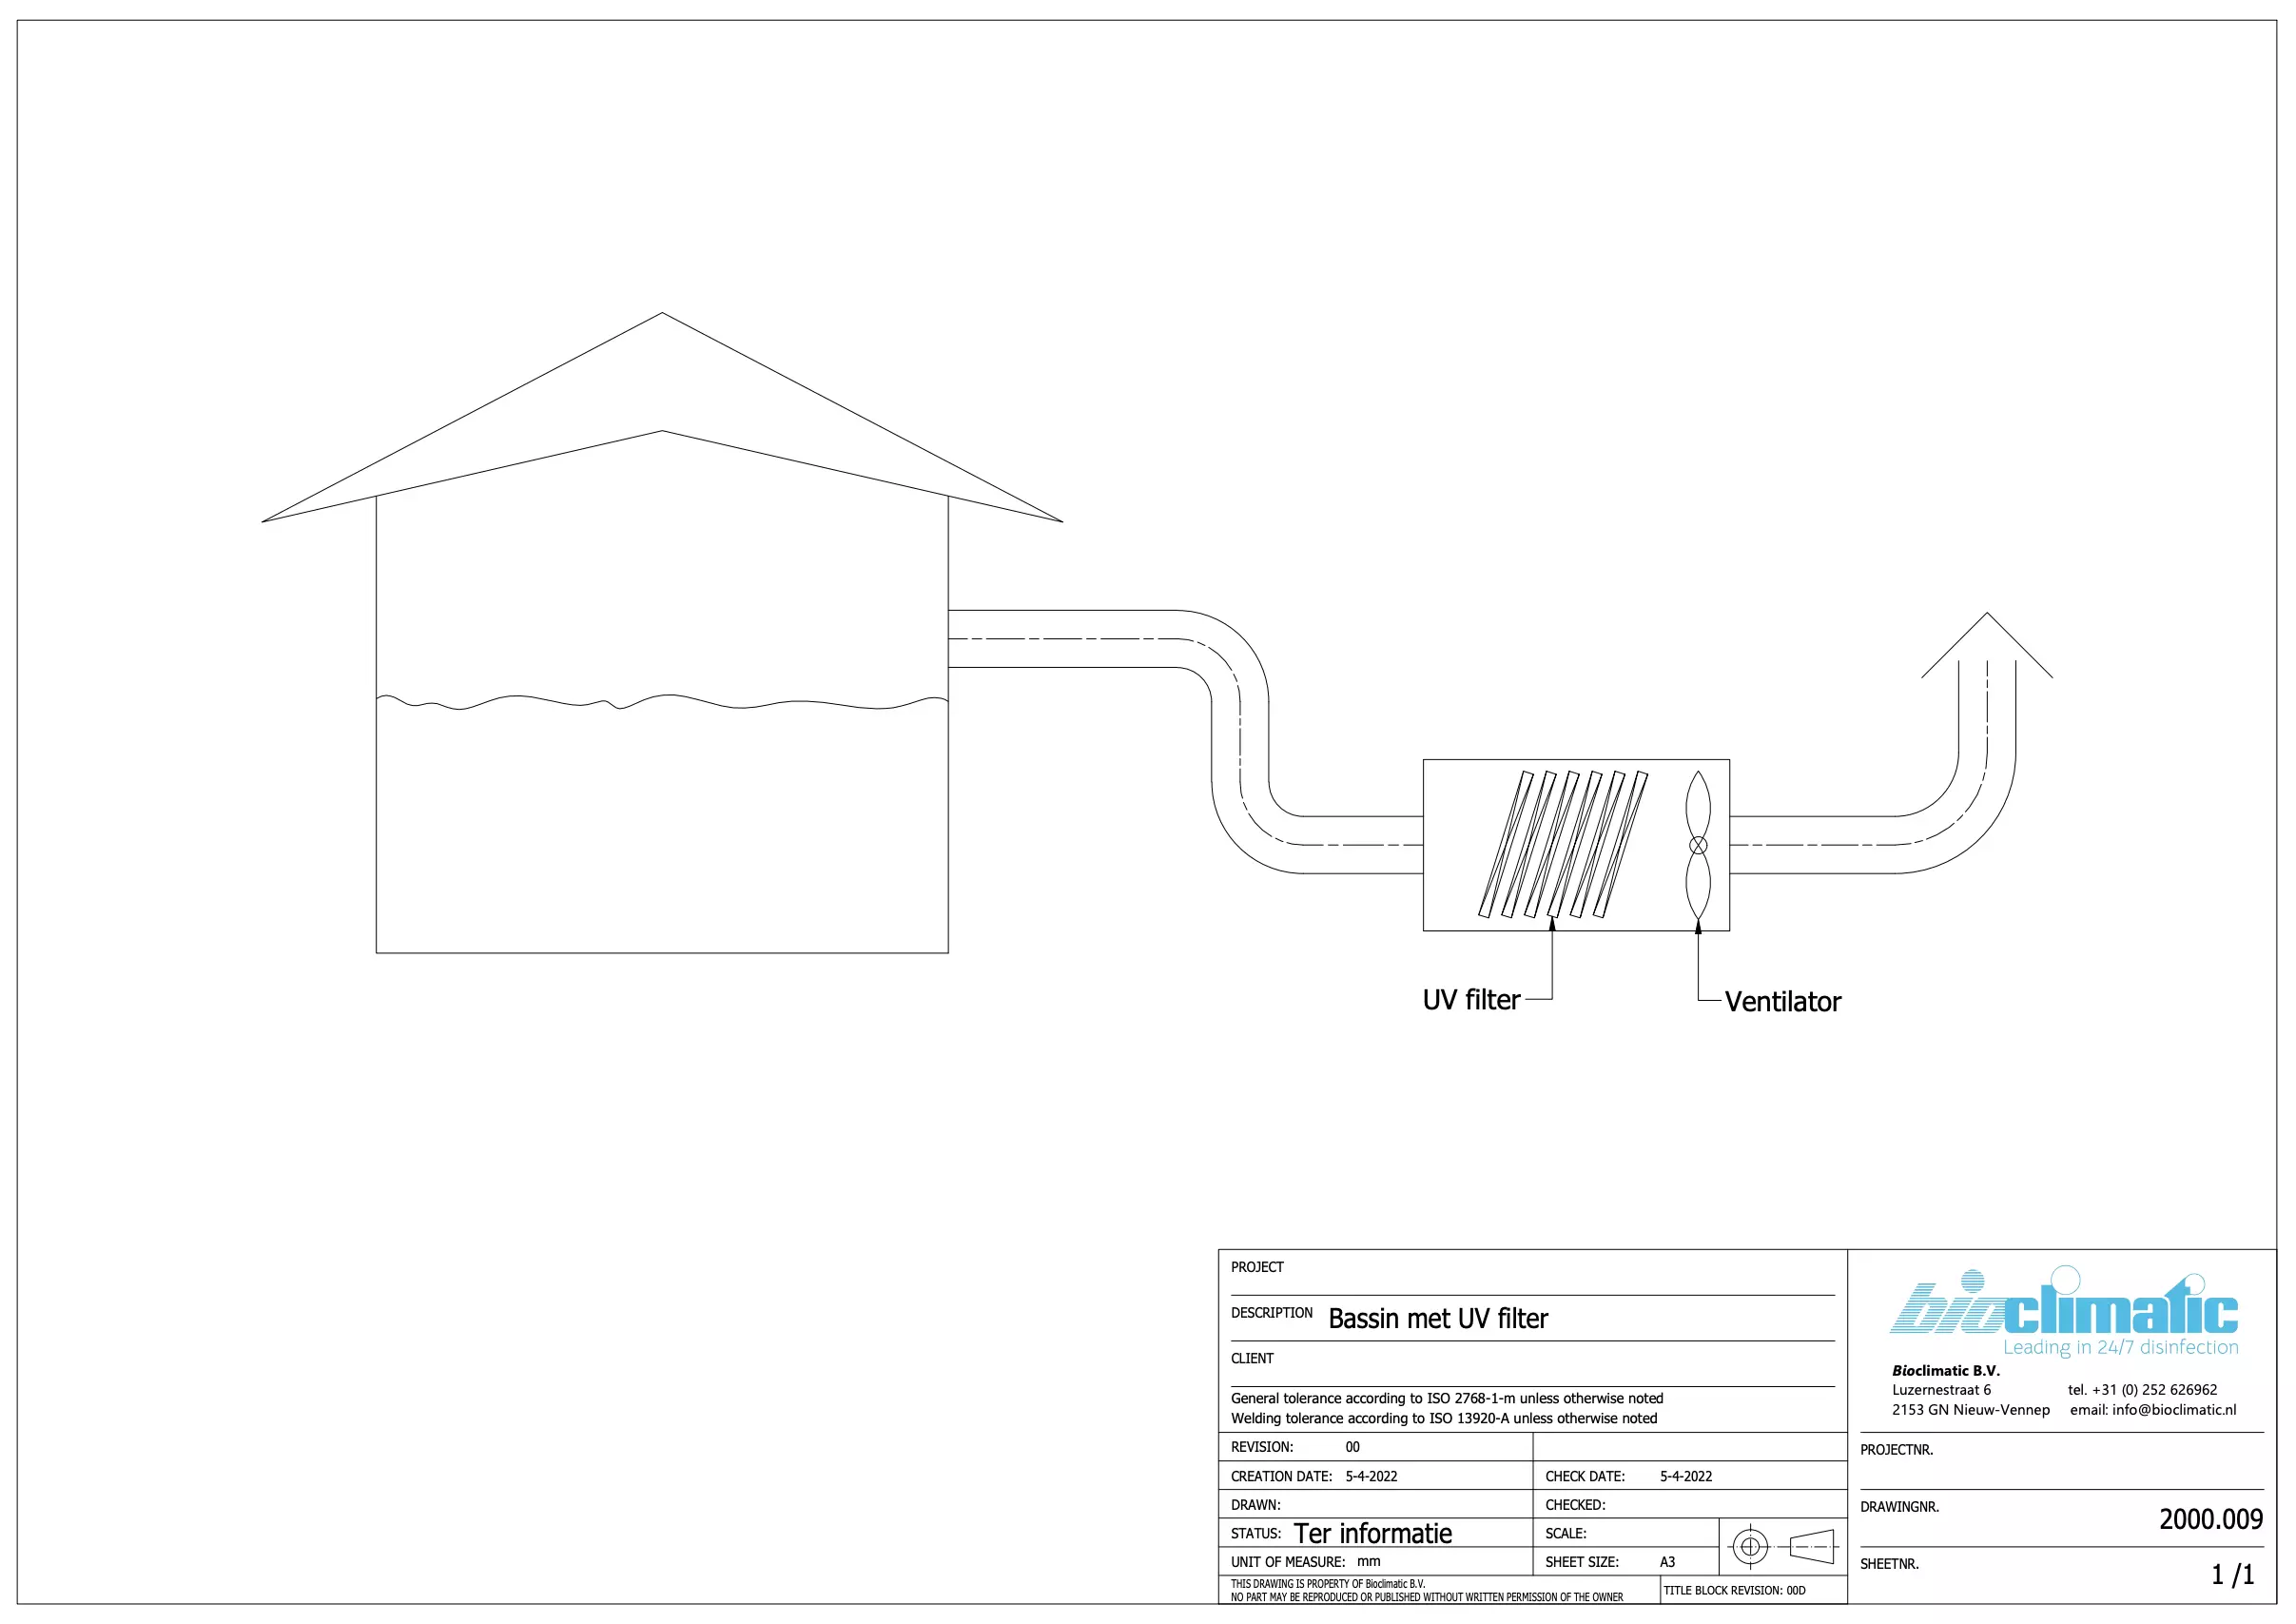 Sketch of the UVC system to disinfect exhaust air set up